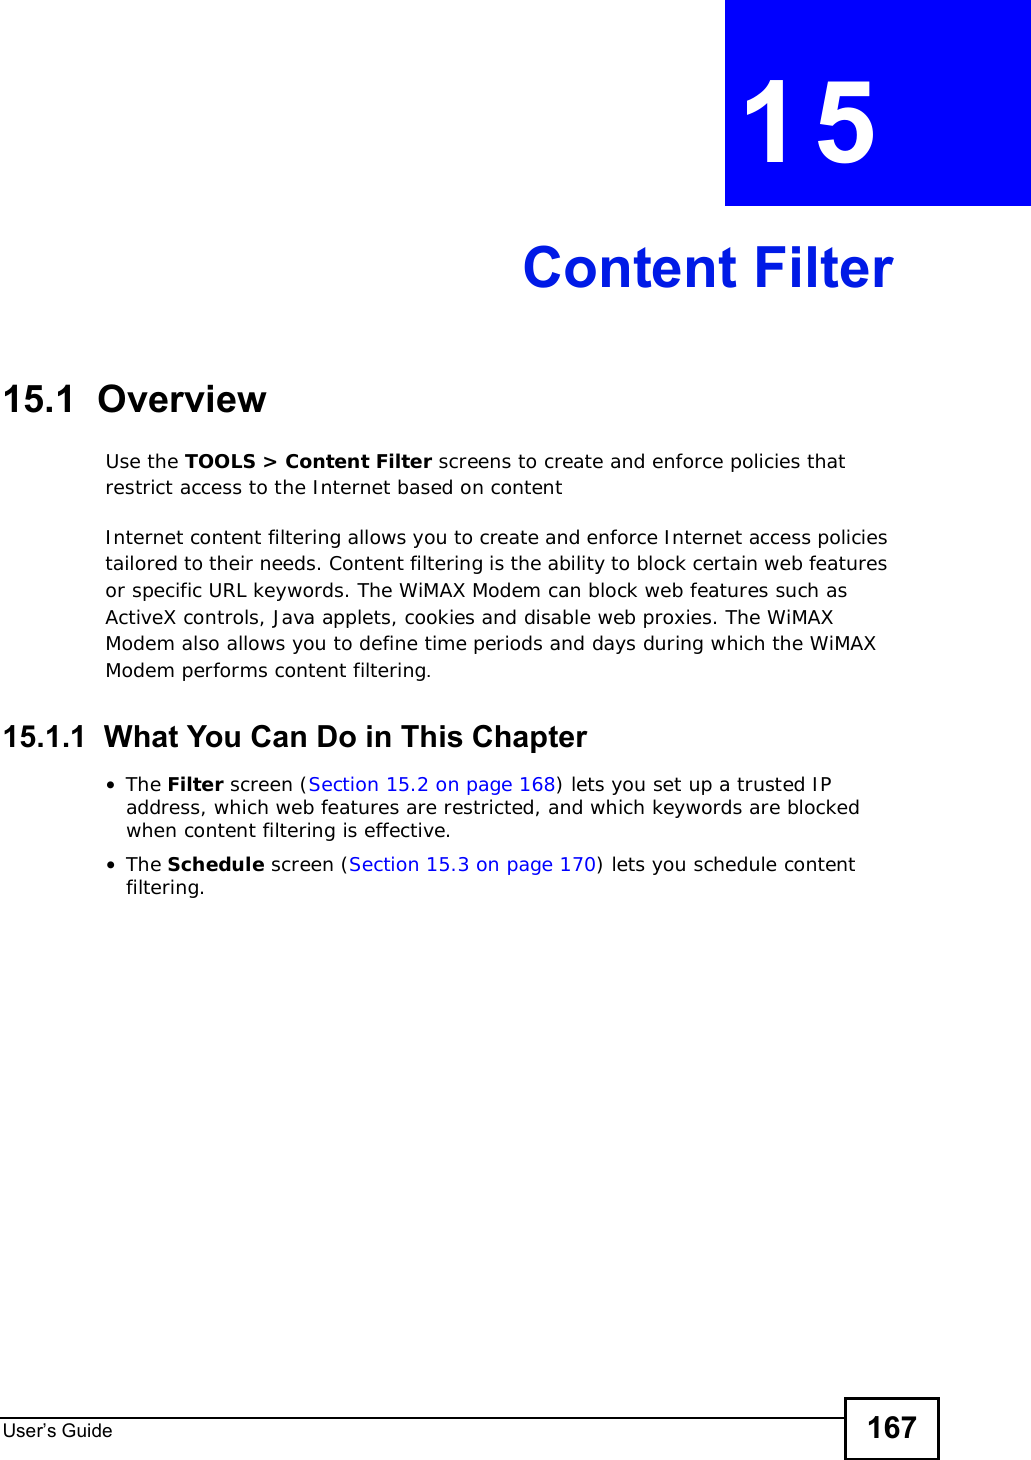 User s Guide 167CHAPTER 15Content Filter15.1  OverviewUse the TOOLS &gt; Content Filter screens to create and enforce policies that restrict access to the Internet based on contentInternet content filtering allows you to create and enforce Internet access policies tailored to their needs. Content filtering is the ability to block certain web features or specific URL keywords. The WiMAX Modem can block web features such as ActiveX controls, Java applets, cookies and disable web proxies. The WiMAX Modem also allows you to define time periods and days during which the WiMAX Modem performs content filtering.15.1.1  What You Can Do in This Chapter•The Filter screen (Section 15.2 on page 168) lets you set up a trusted IP address, which web features are restricted, and which keywords are blocked when content filtering is effective.•The Schedule screen (Section 15.3 on page 170) lets you schedule content filtering.